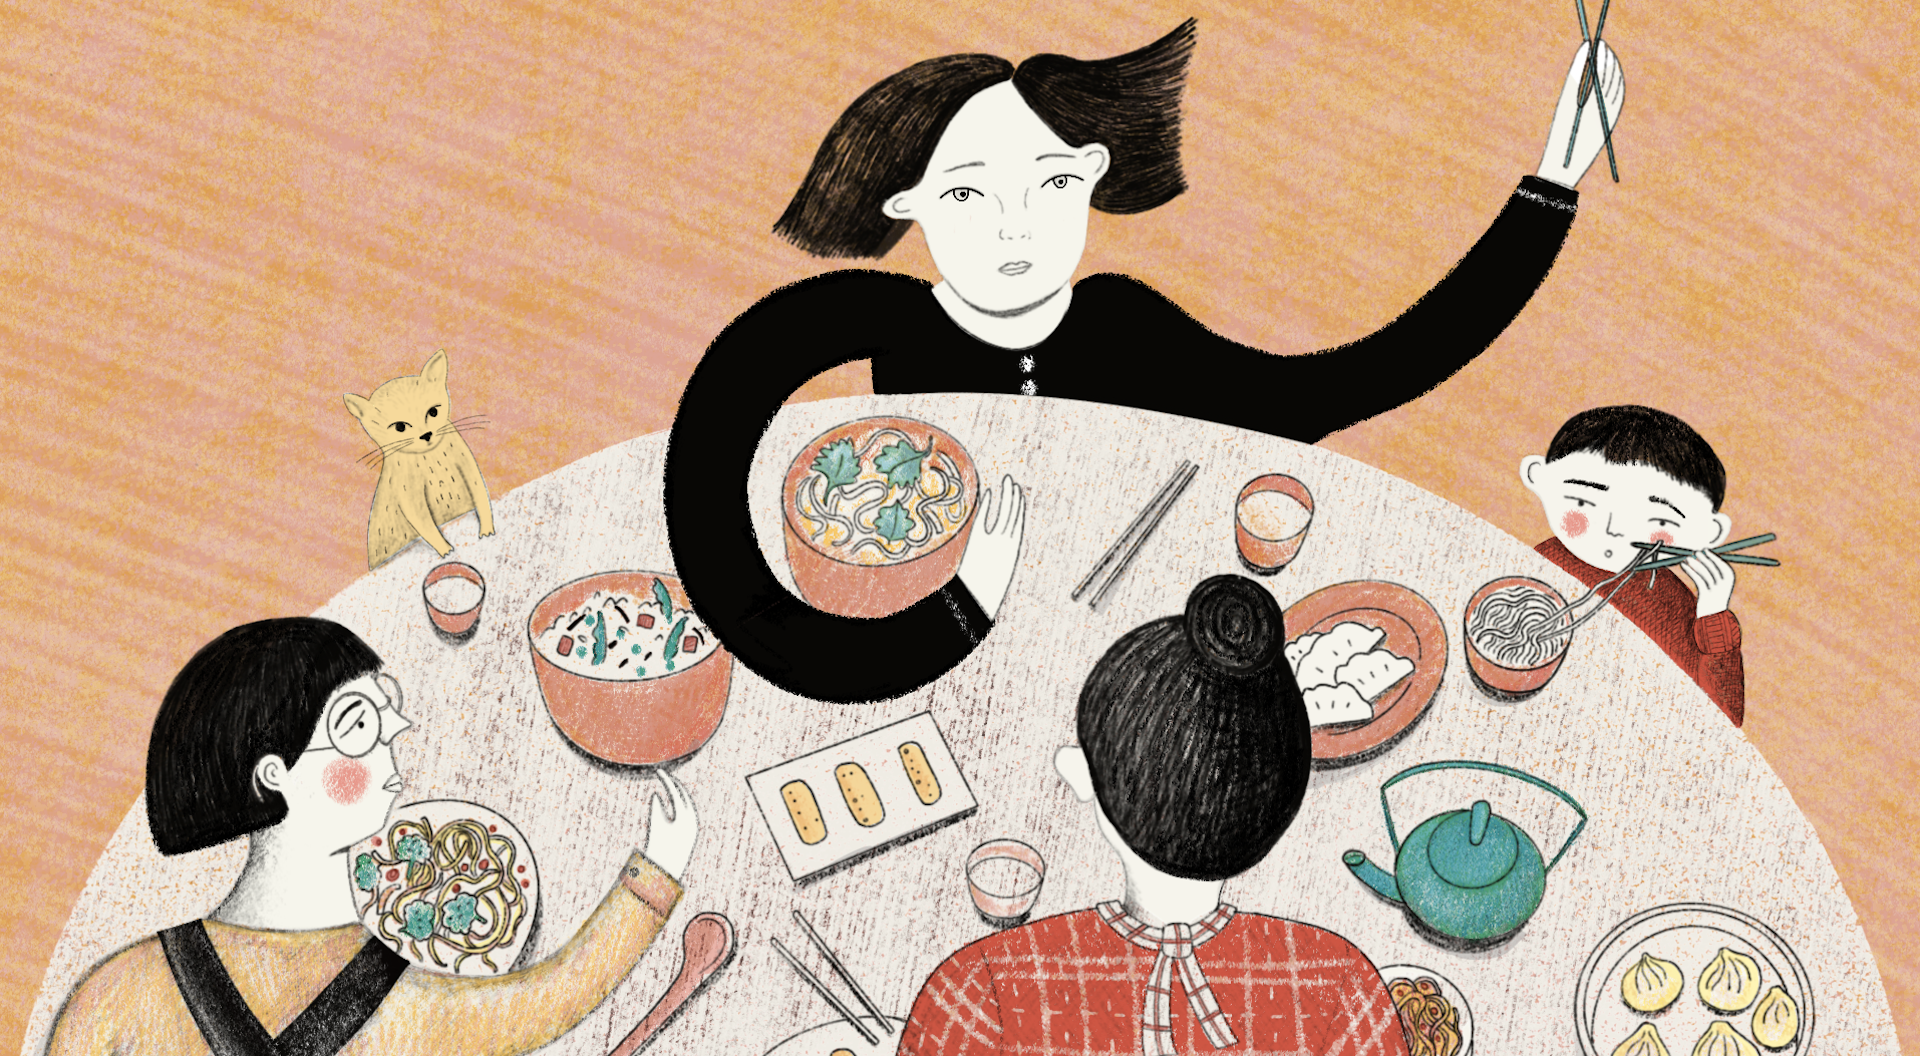 <p>As well as cooking more at home, the Covid-19 lockdown made many Chinese citizens reflect on their attitudes towards health and the environment (illustration: Eréndira Derbez)</p>